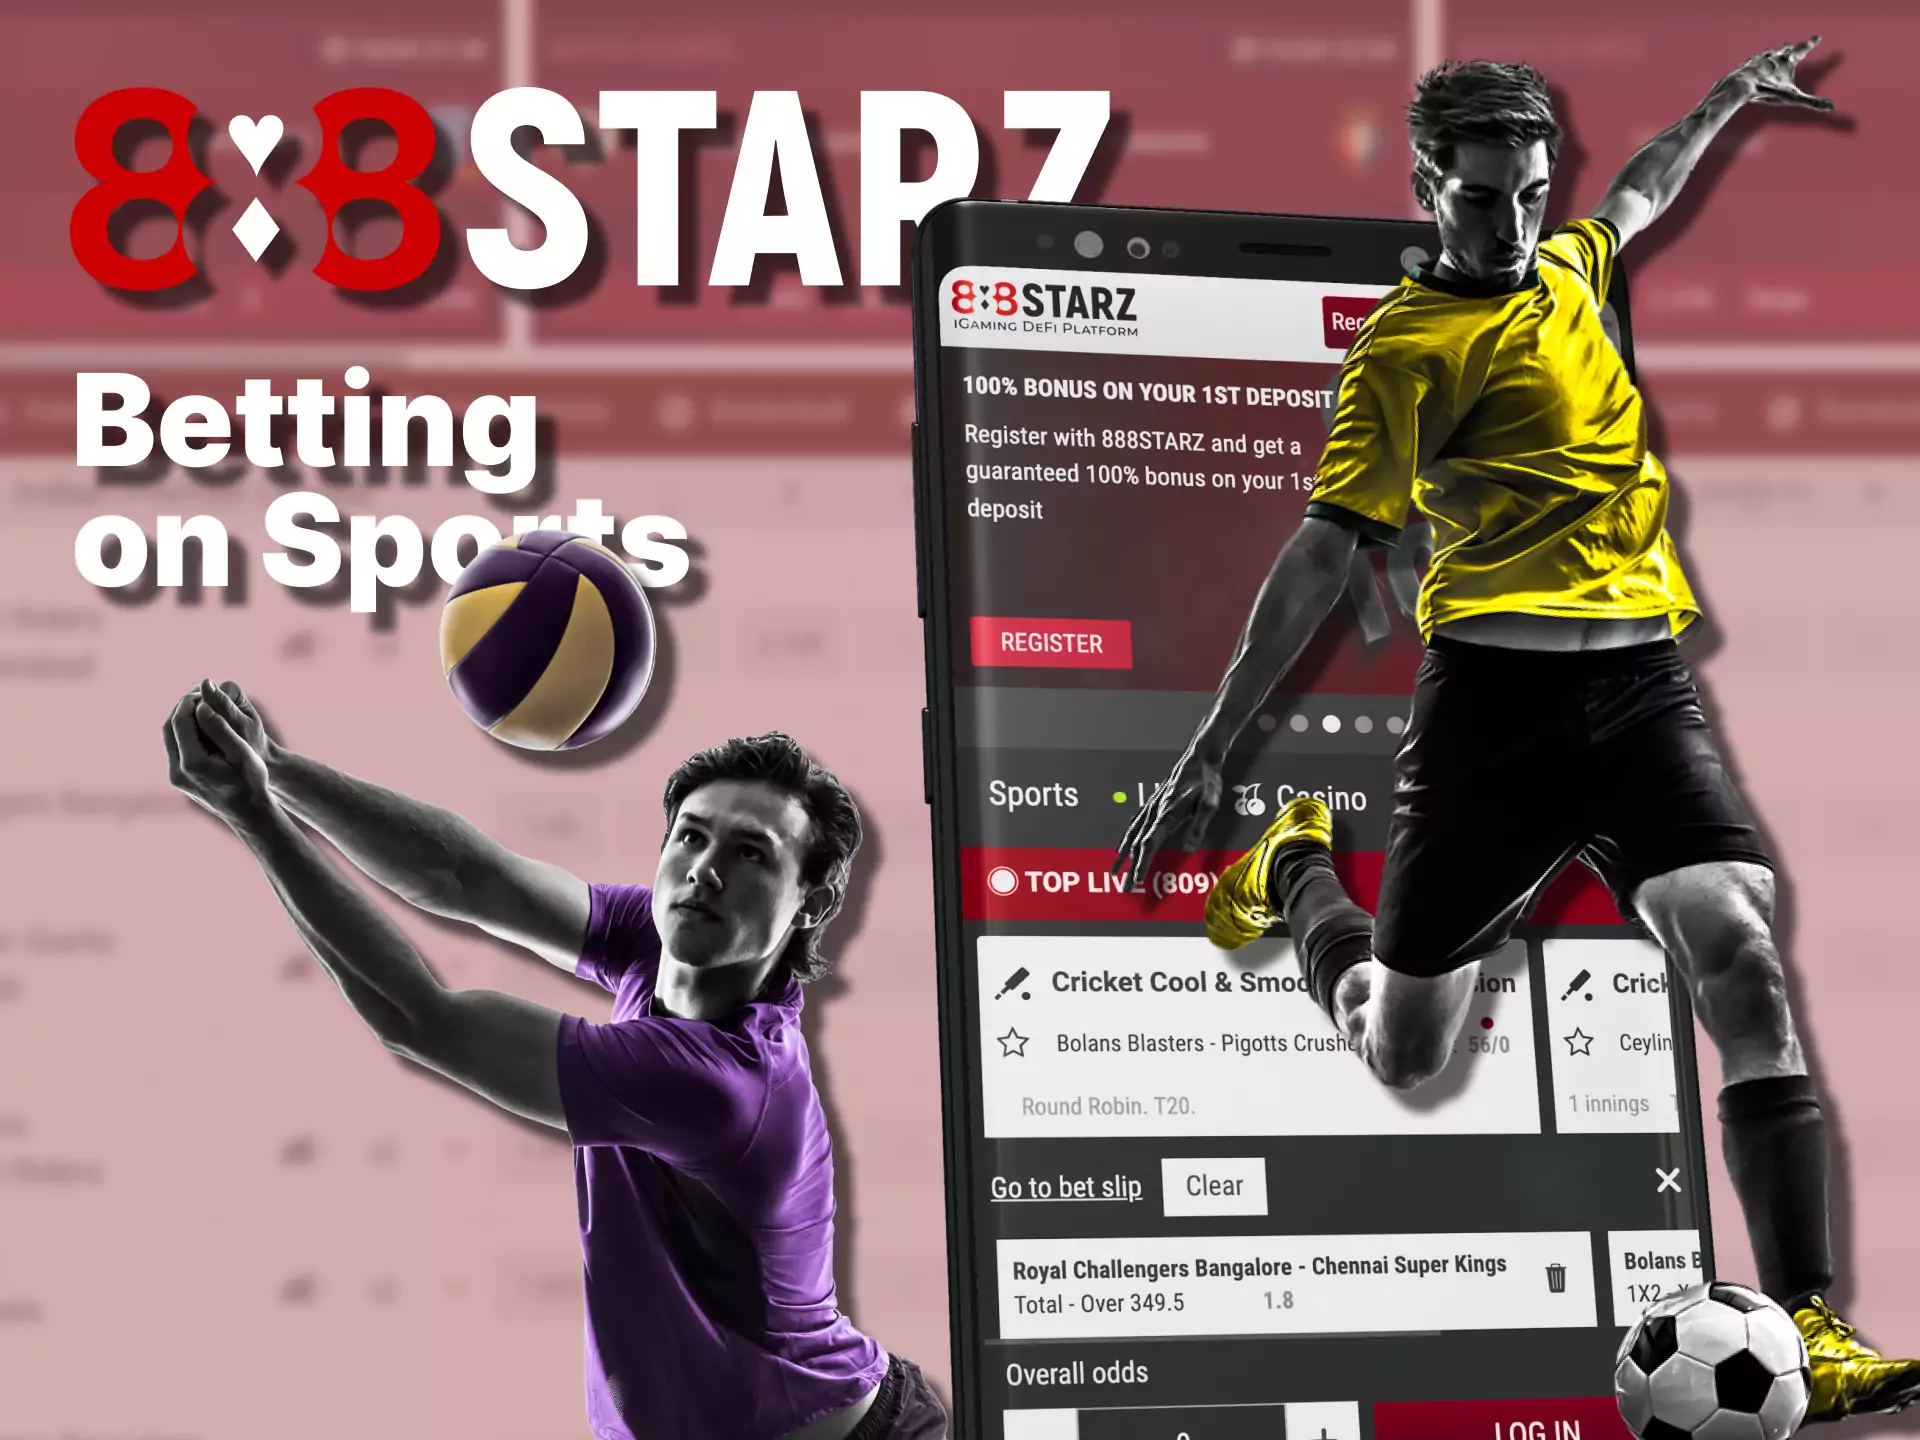 You can bet on a variety of sports in the 888starz app .